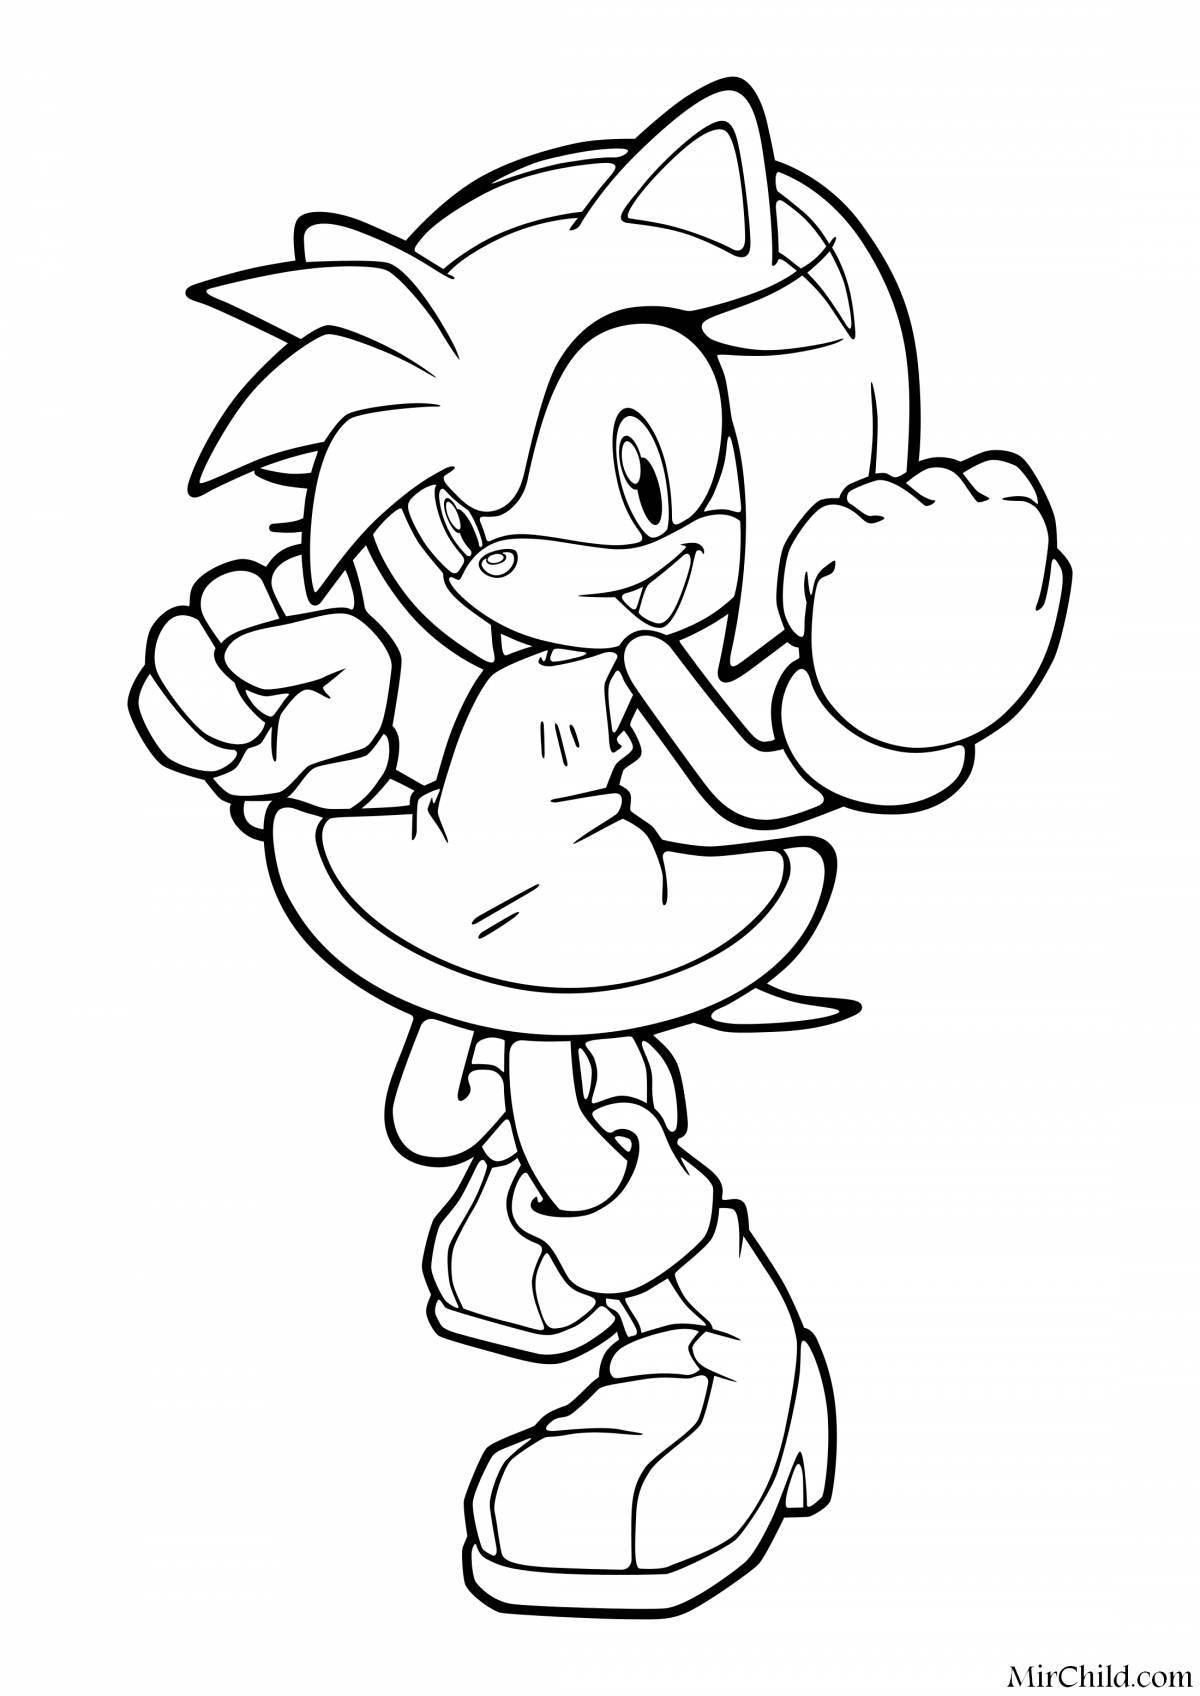 Sonic amy playful coloring